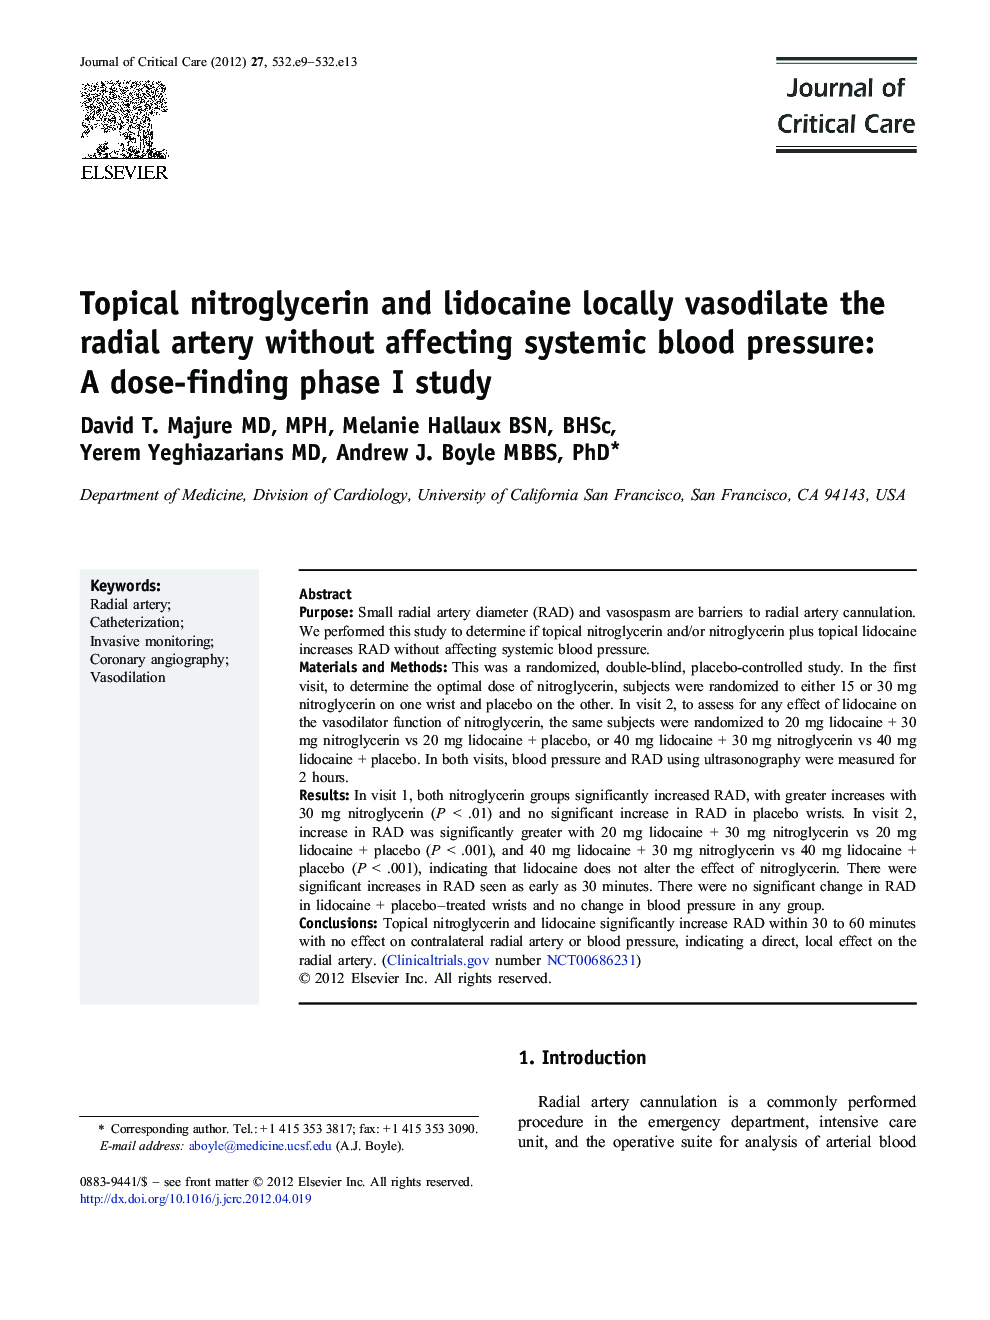 Topical nitroglycerin and lidocaine locally vasodilate the radial artery without affecting systemic blood pressure: A dose-finding phase I study